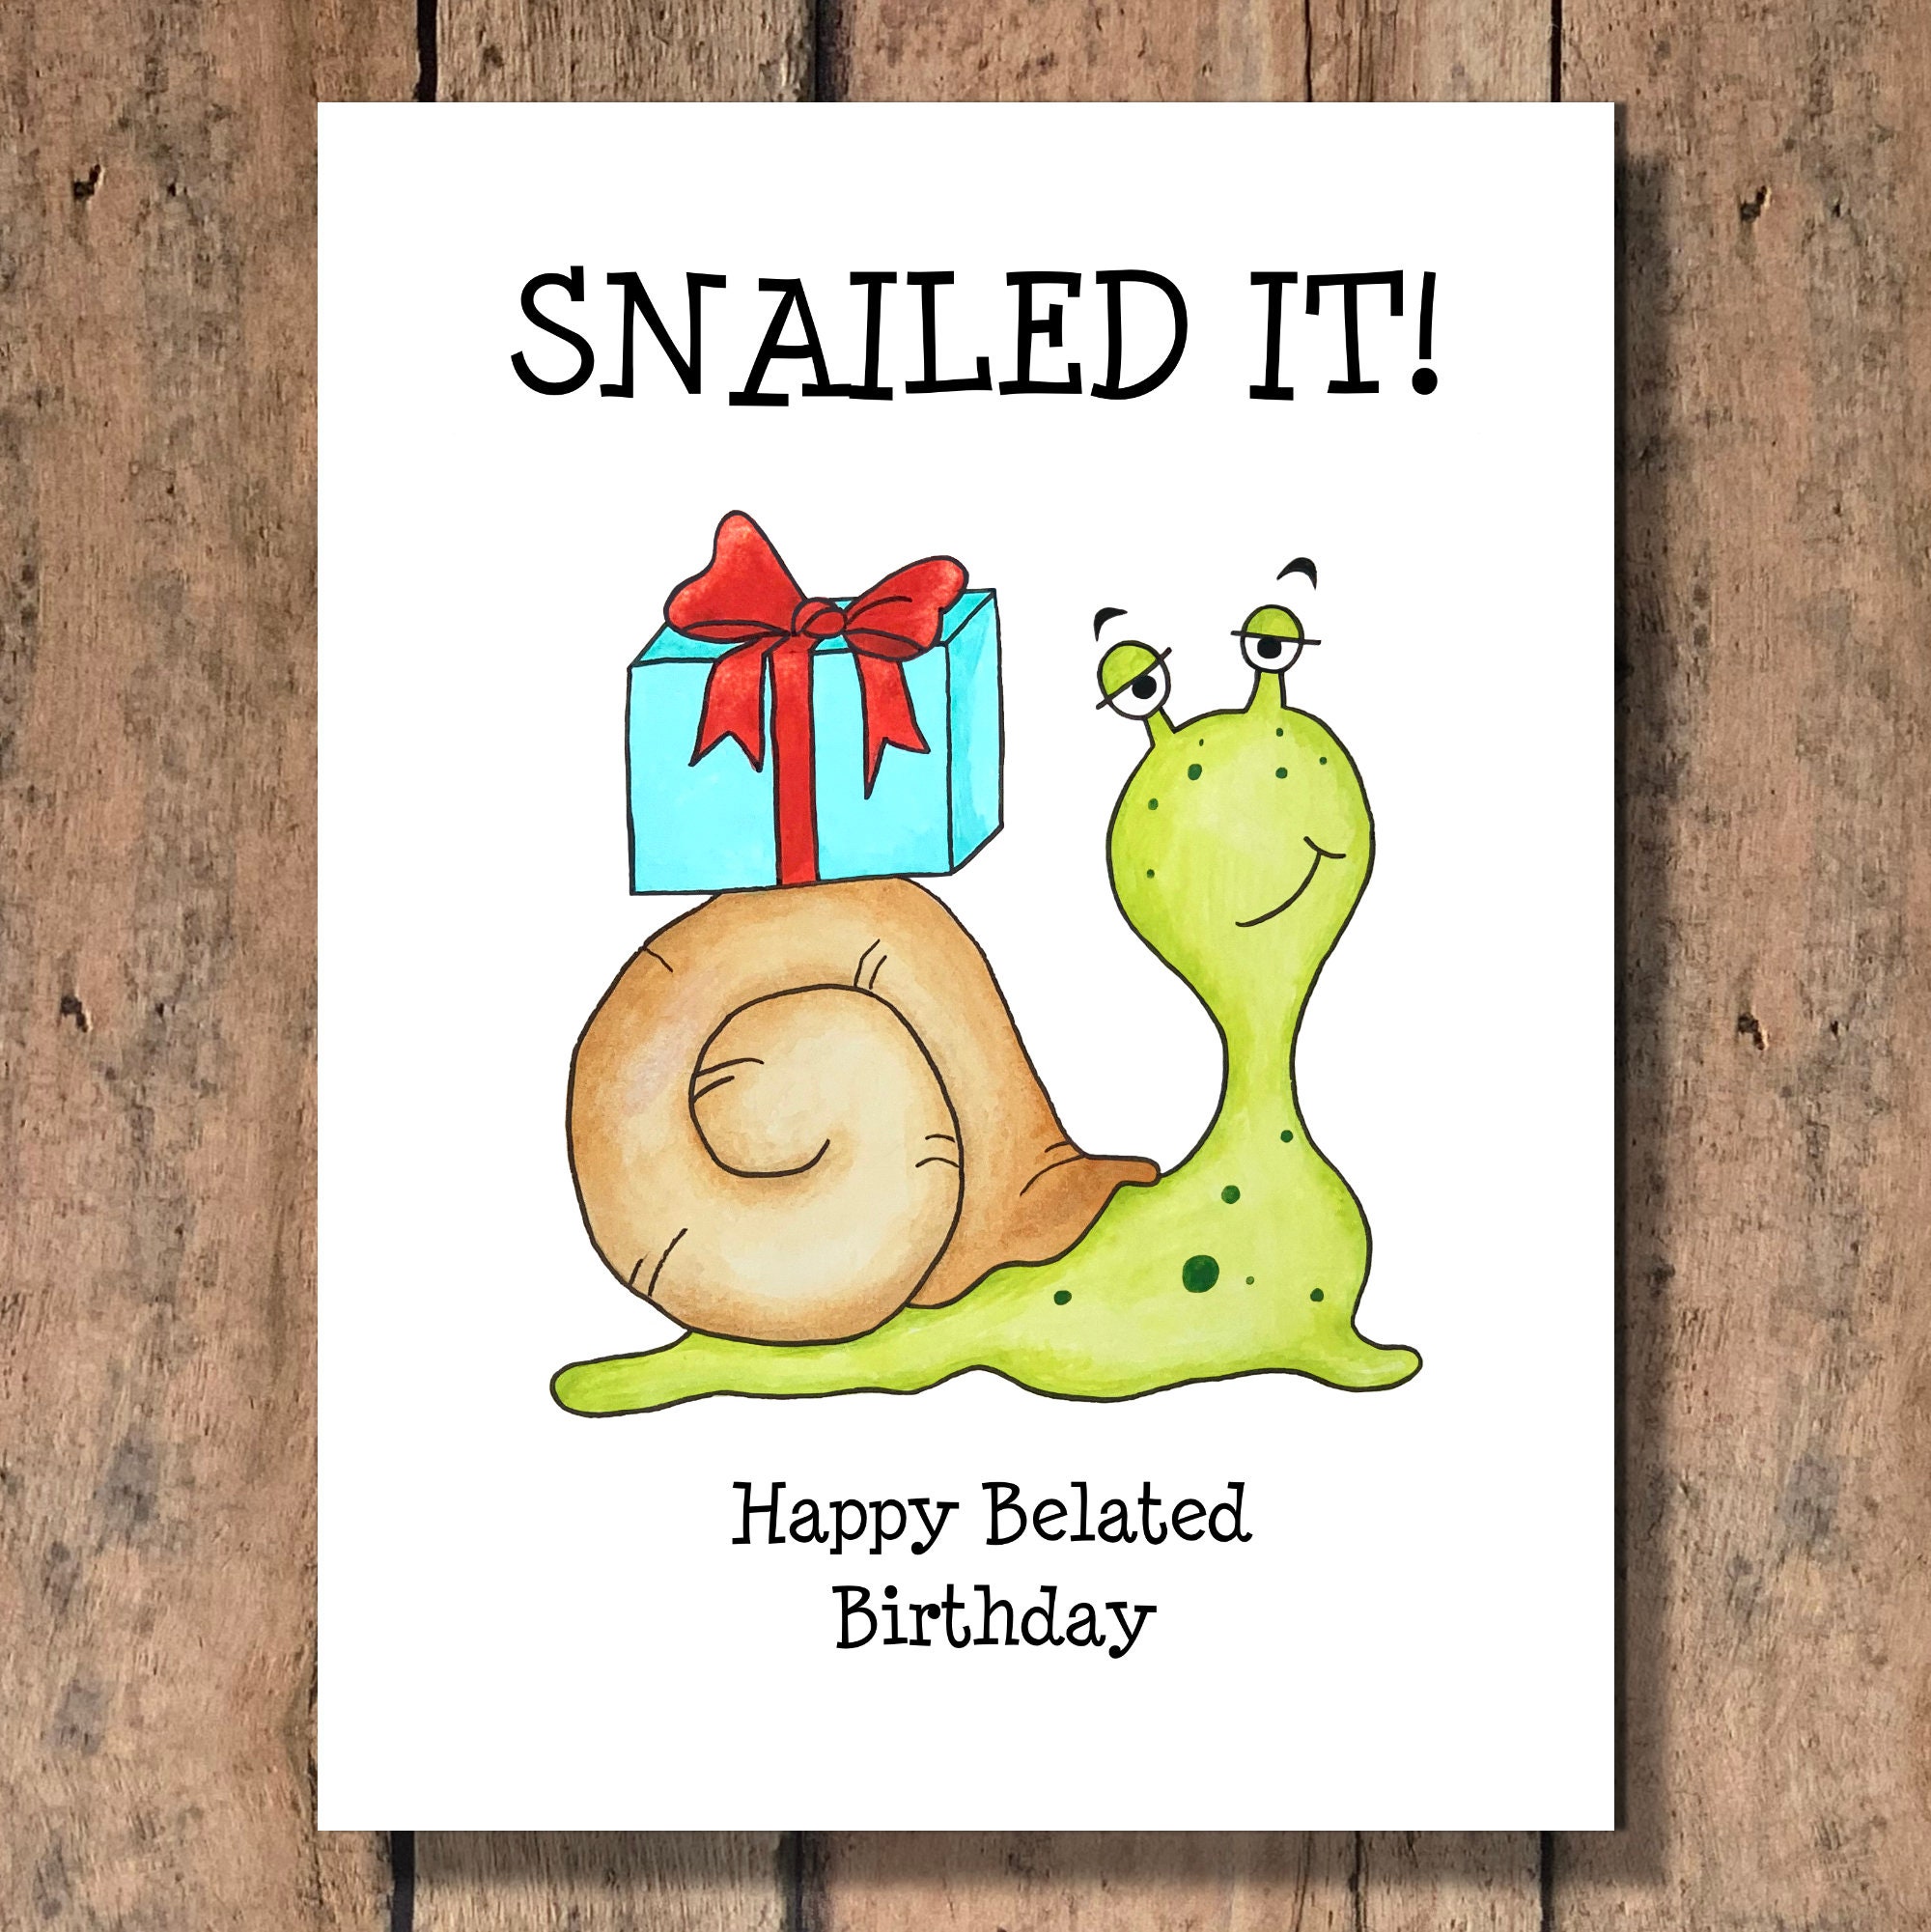 Funny Belated Birthday Card Snailed It - Etsy